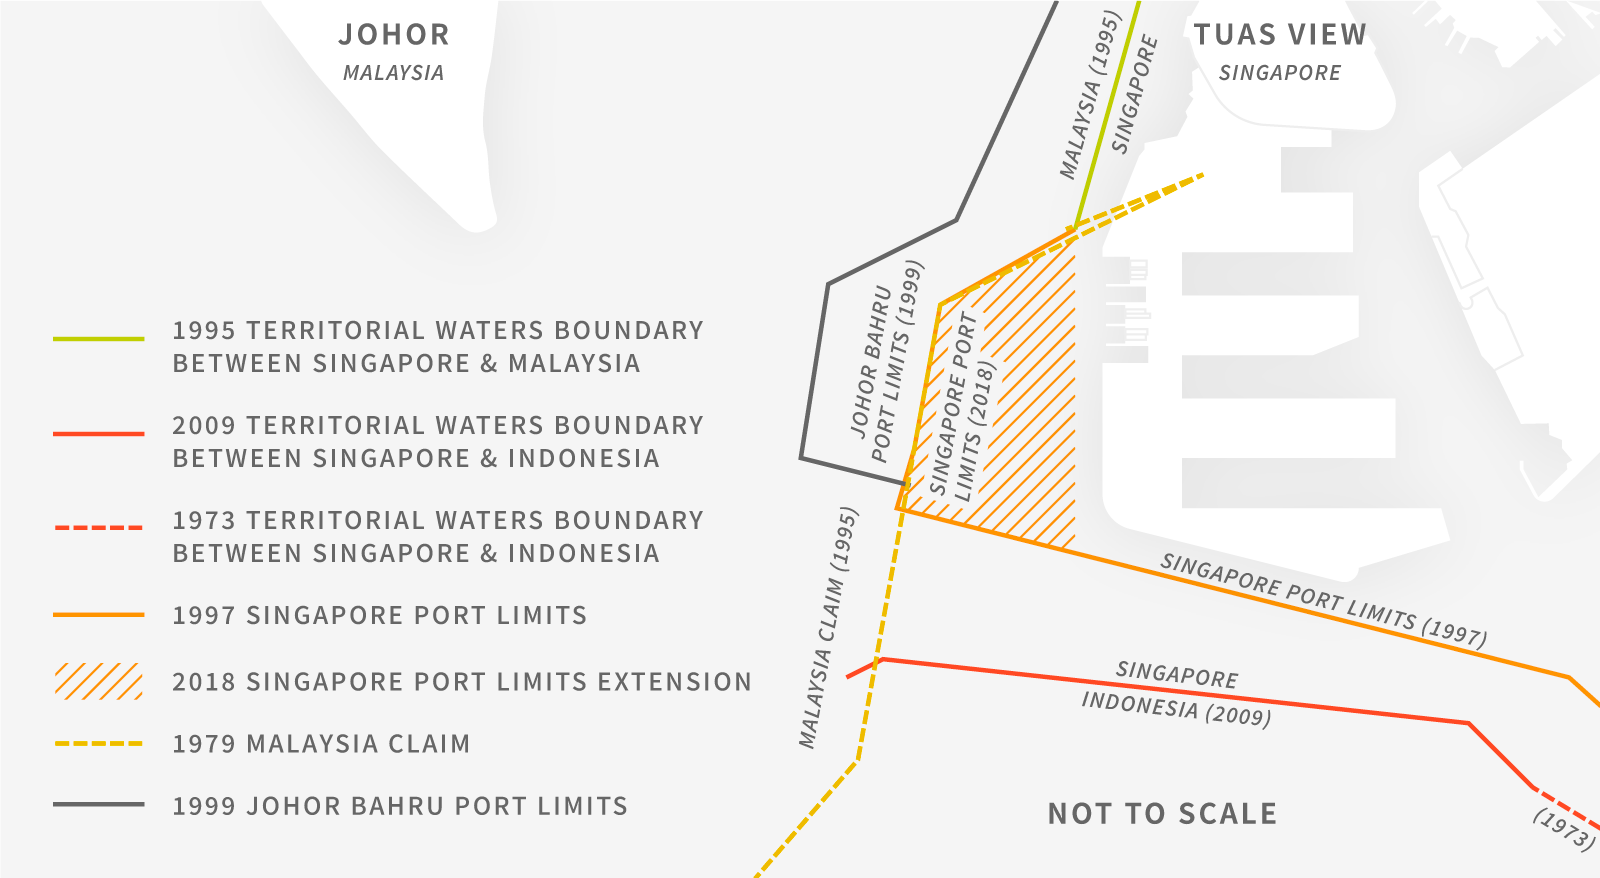 Contested port limits in the Johor Strait between Malaysia and Singapore